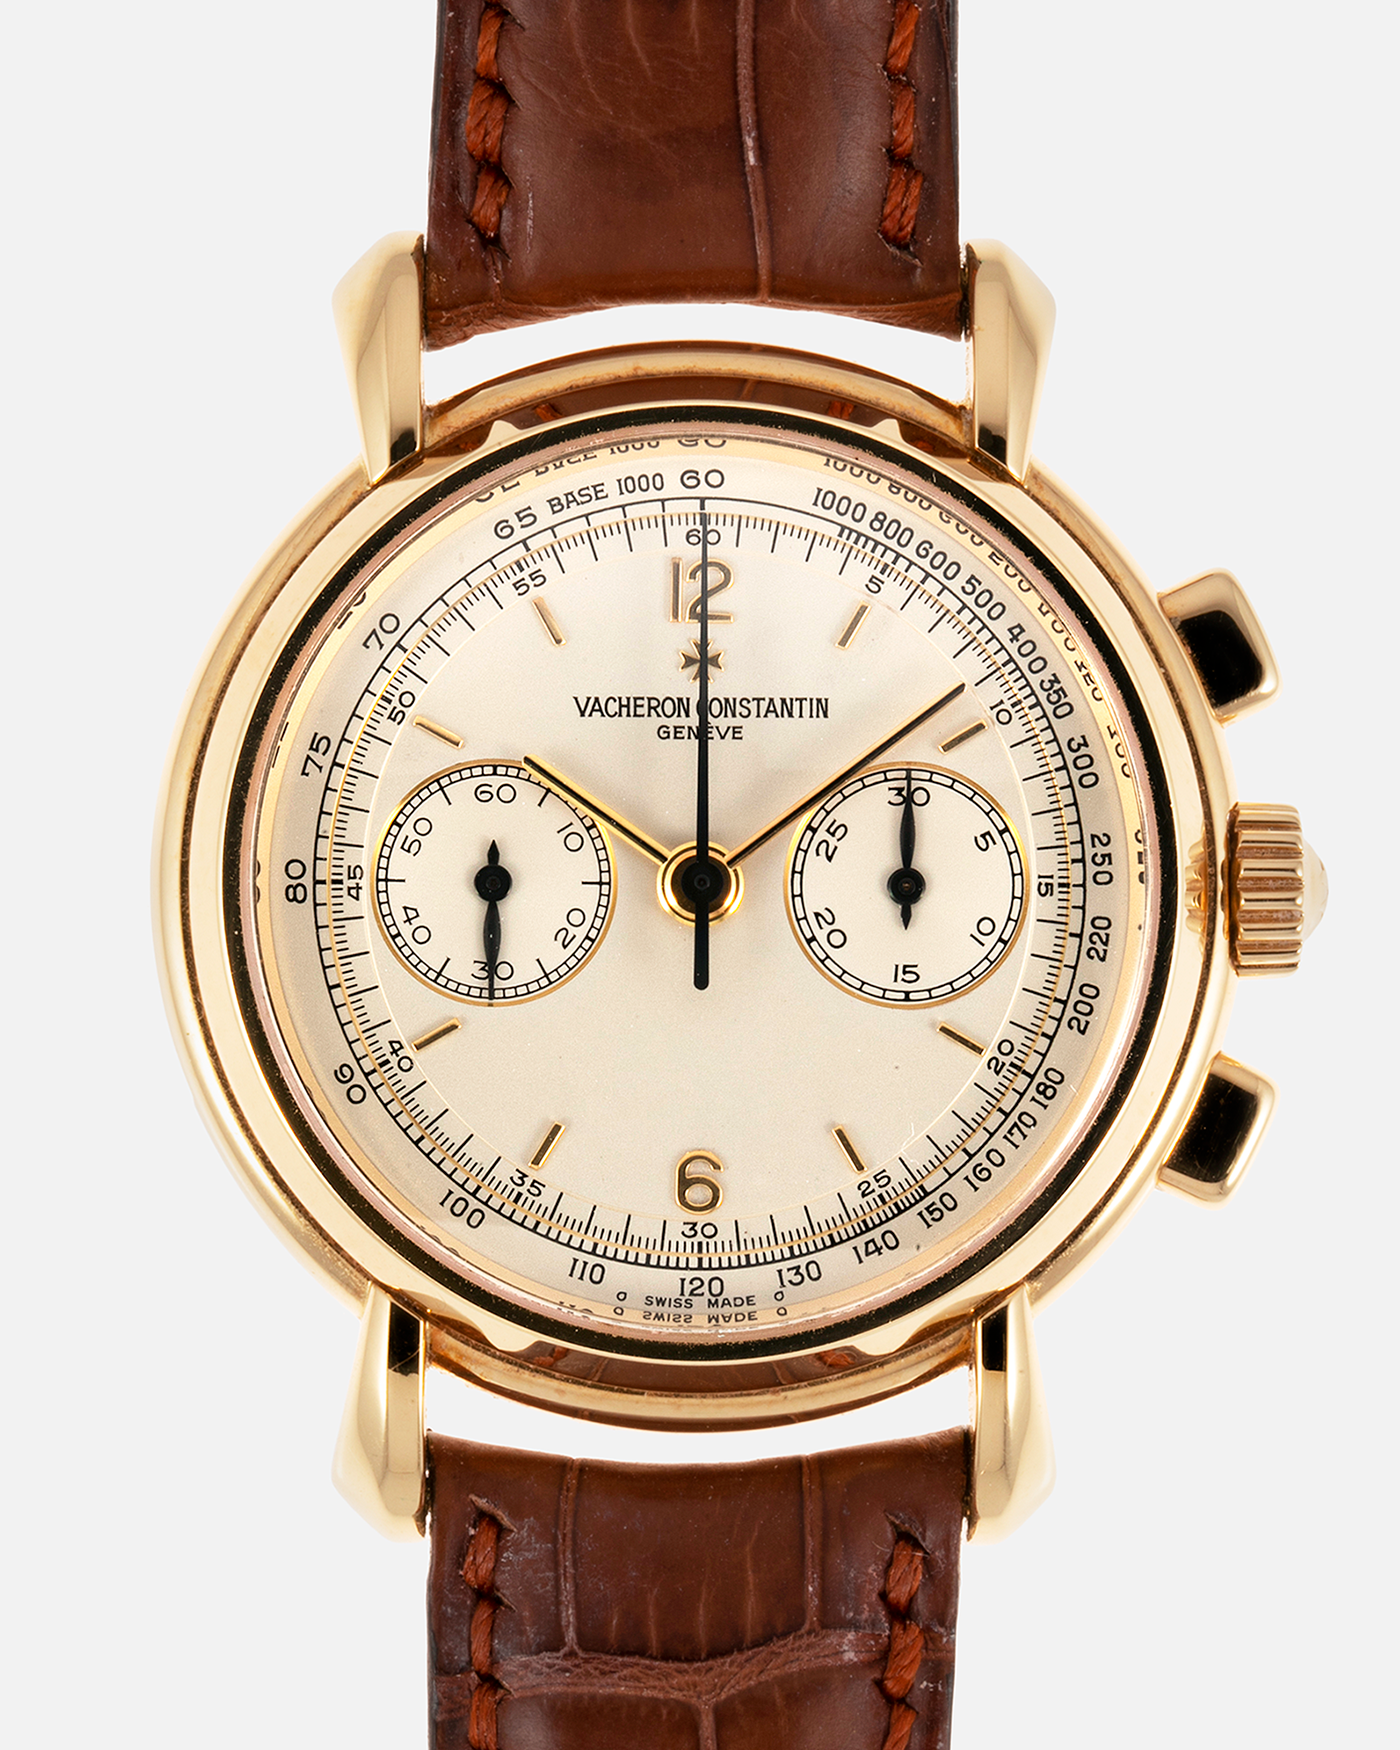 Brand: Vacheron Constantin Year: 2000’s Model: Les Historiques Chronograph Reference Number: 47101 Material: 18-carat Yellow Gold Movement: Lemania 2320 Based Cal. 1141 Case Diameter: 37mm Bracelet: Vacheron Constantin Alligator Brown Leather Strap with Signed 18-carat Yellow Gold Tang Buckle